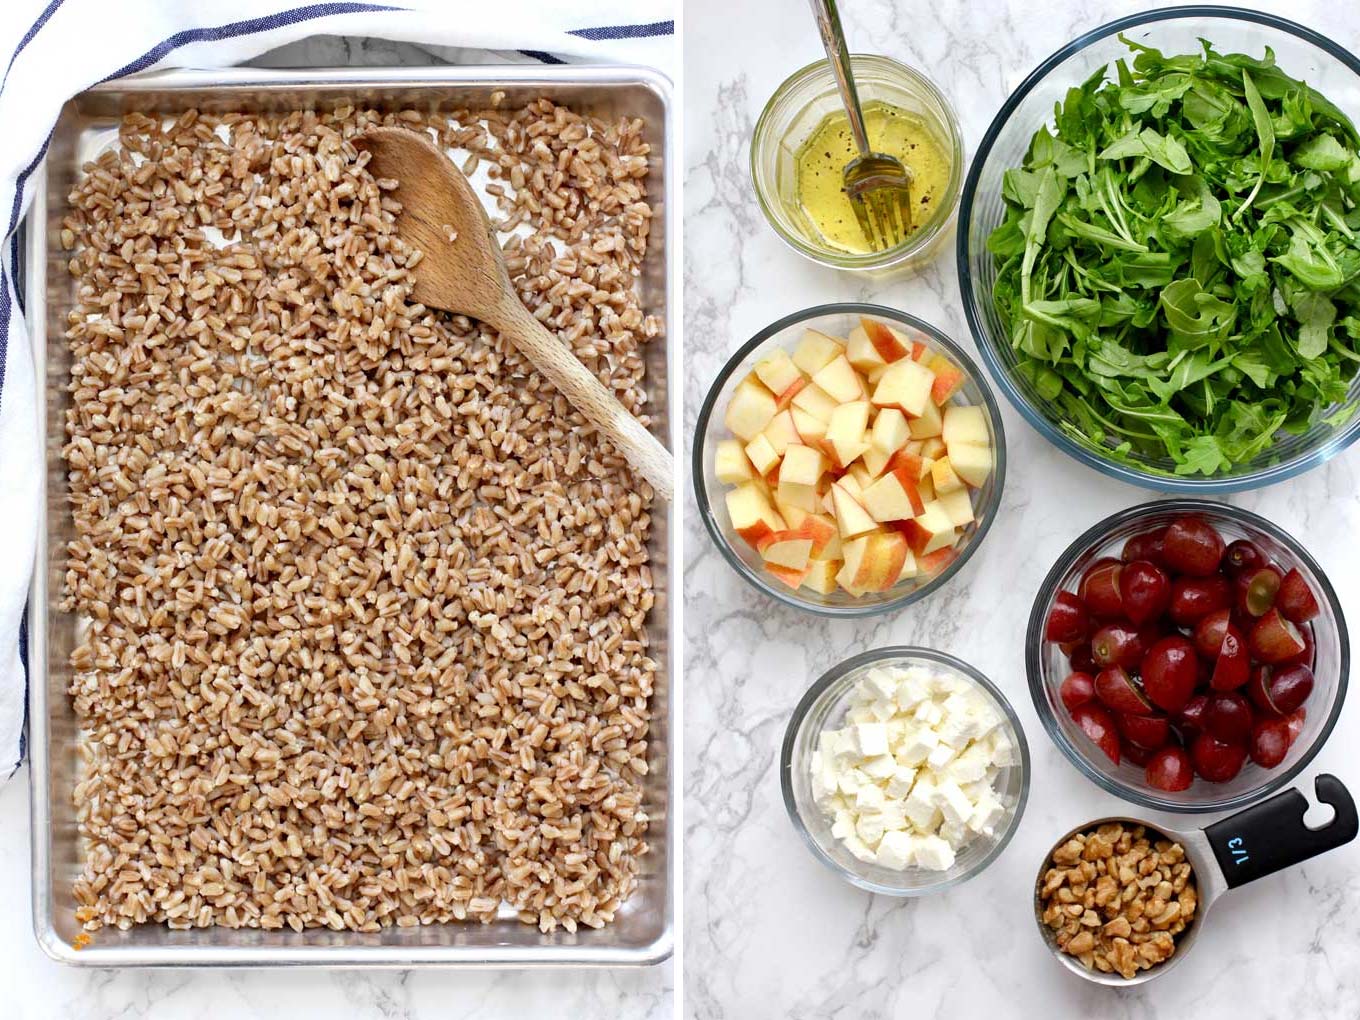 Side by side photo of cooked farro and salad ingredients - grapes, apples, feta cheese, arugula, walnuts and dressing.